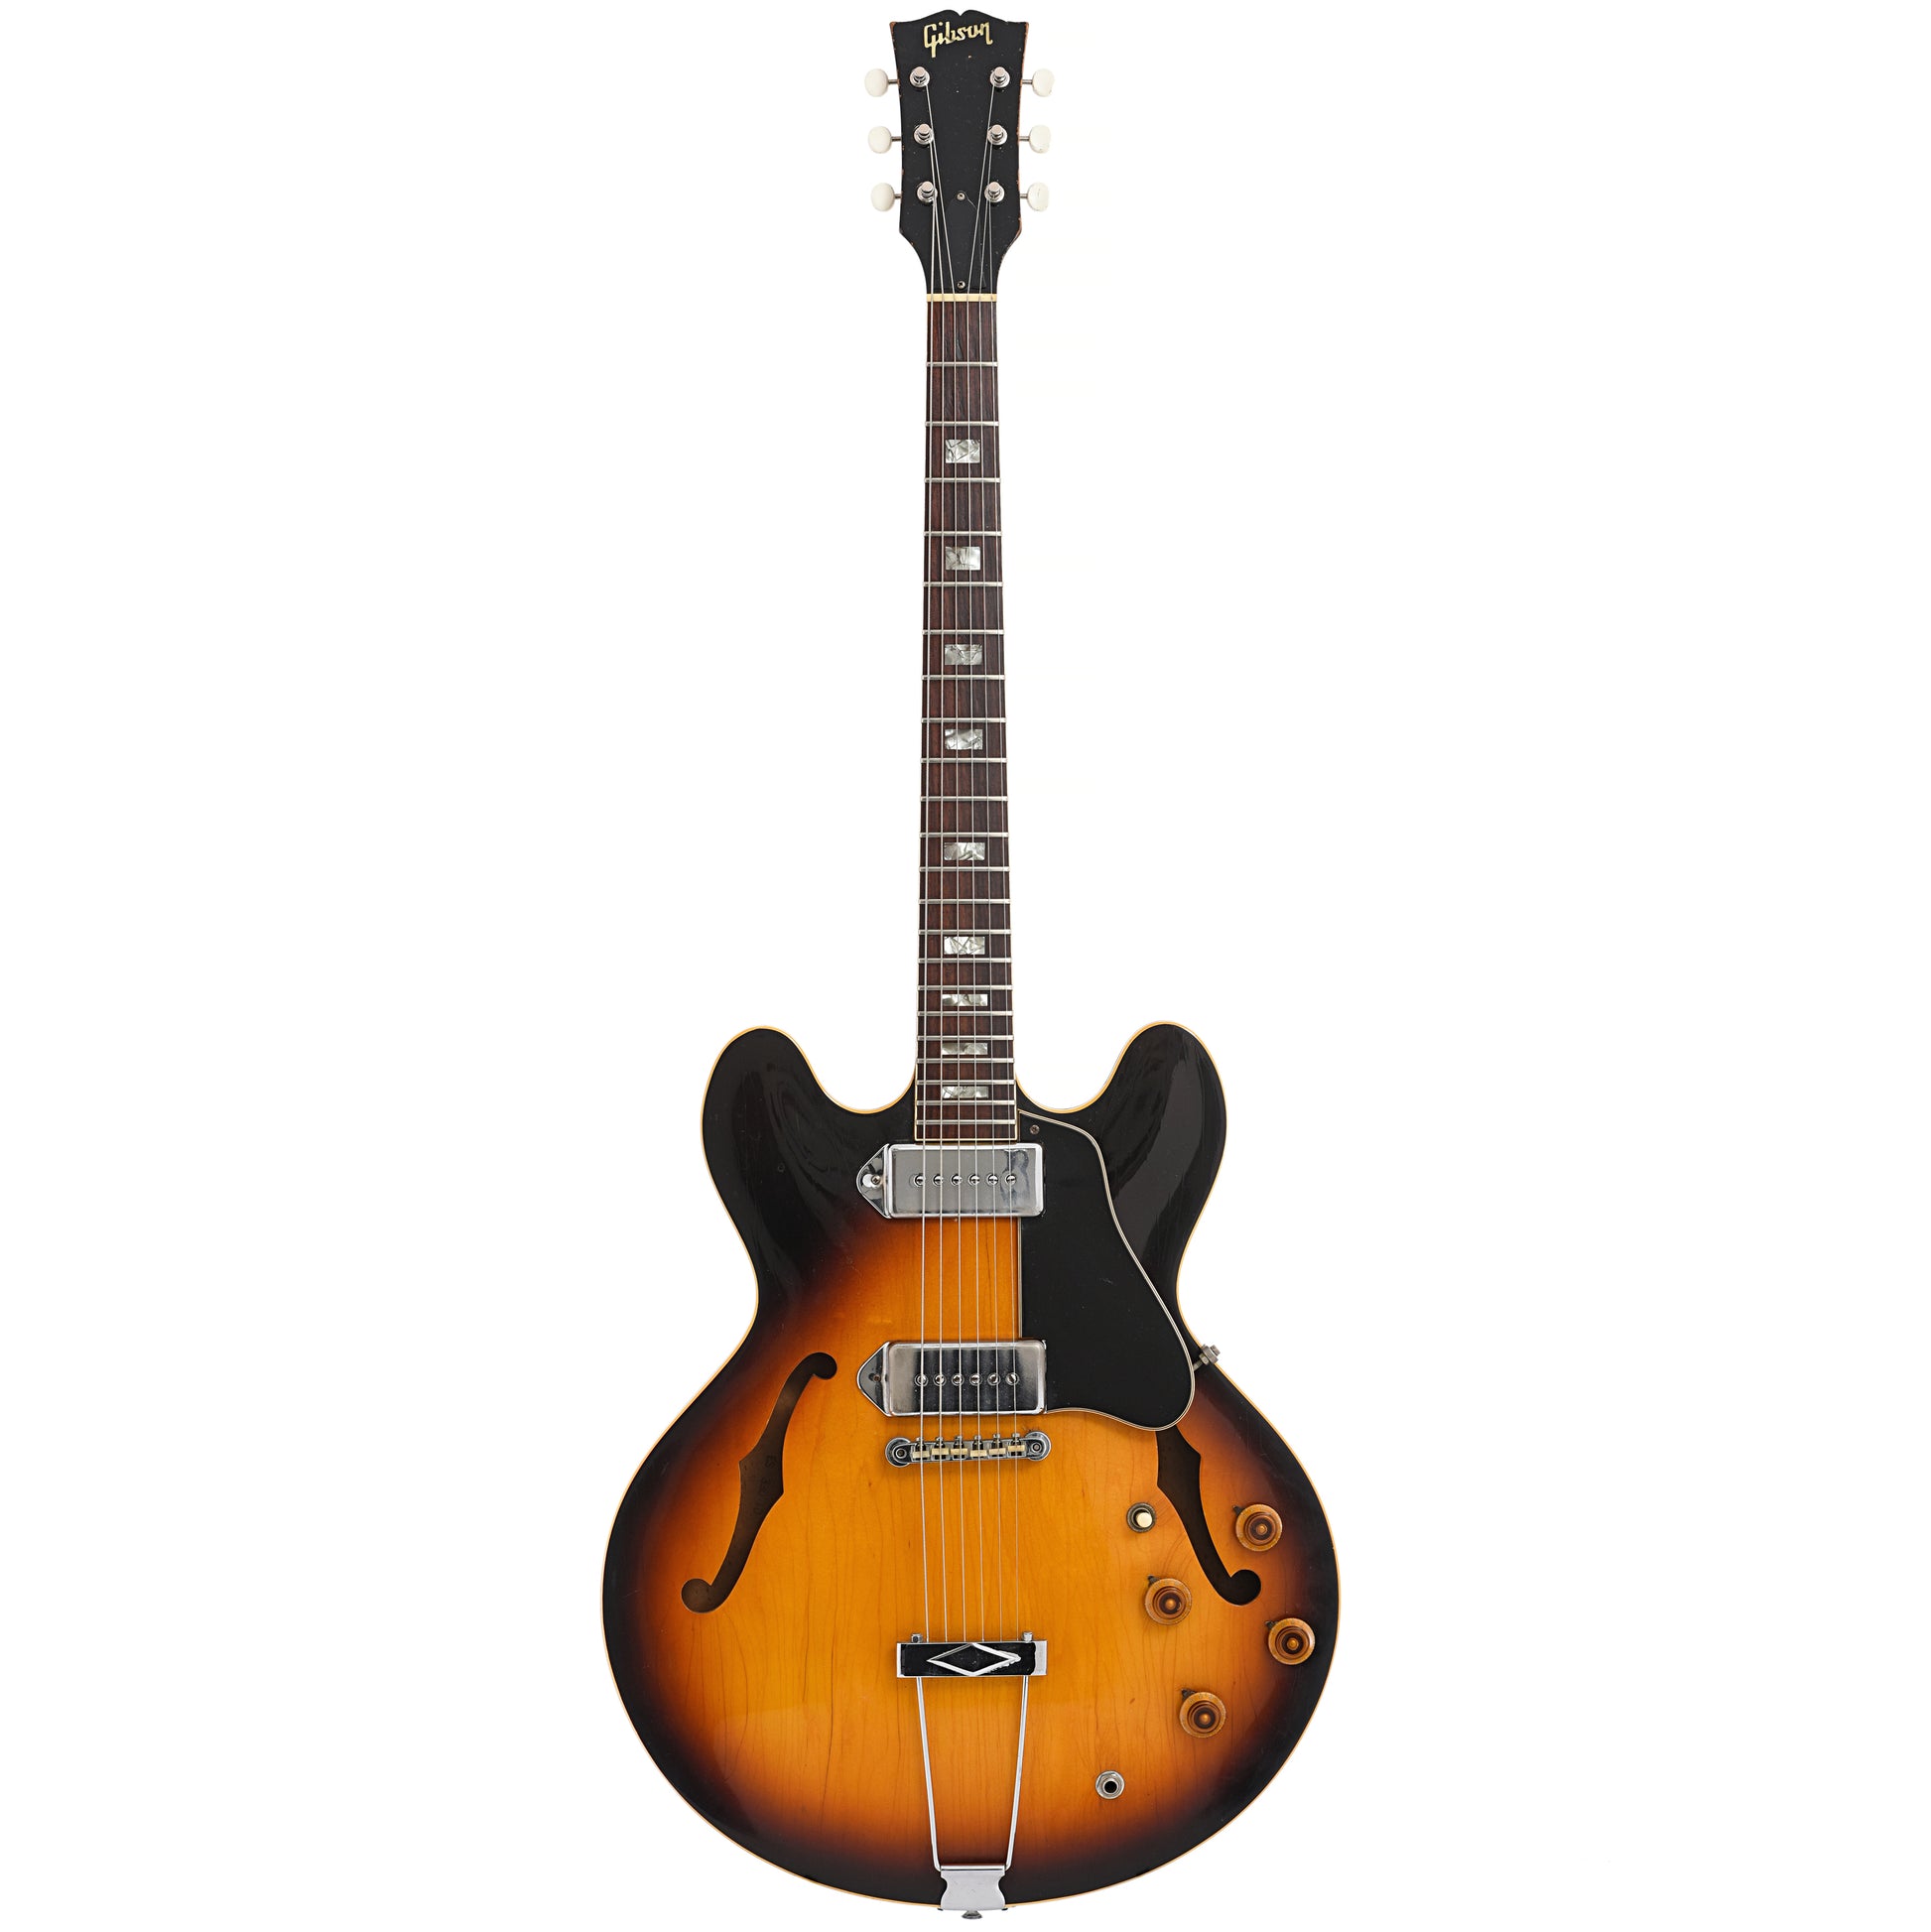 Full front of Gibson ES-330TD Hollow Body Electric Guitar (c.1968)